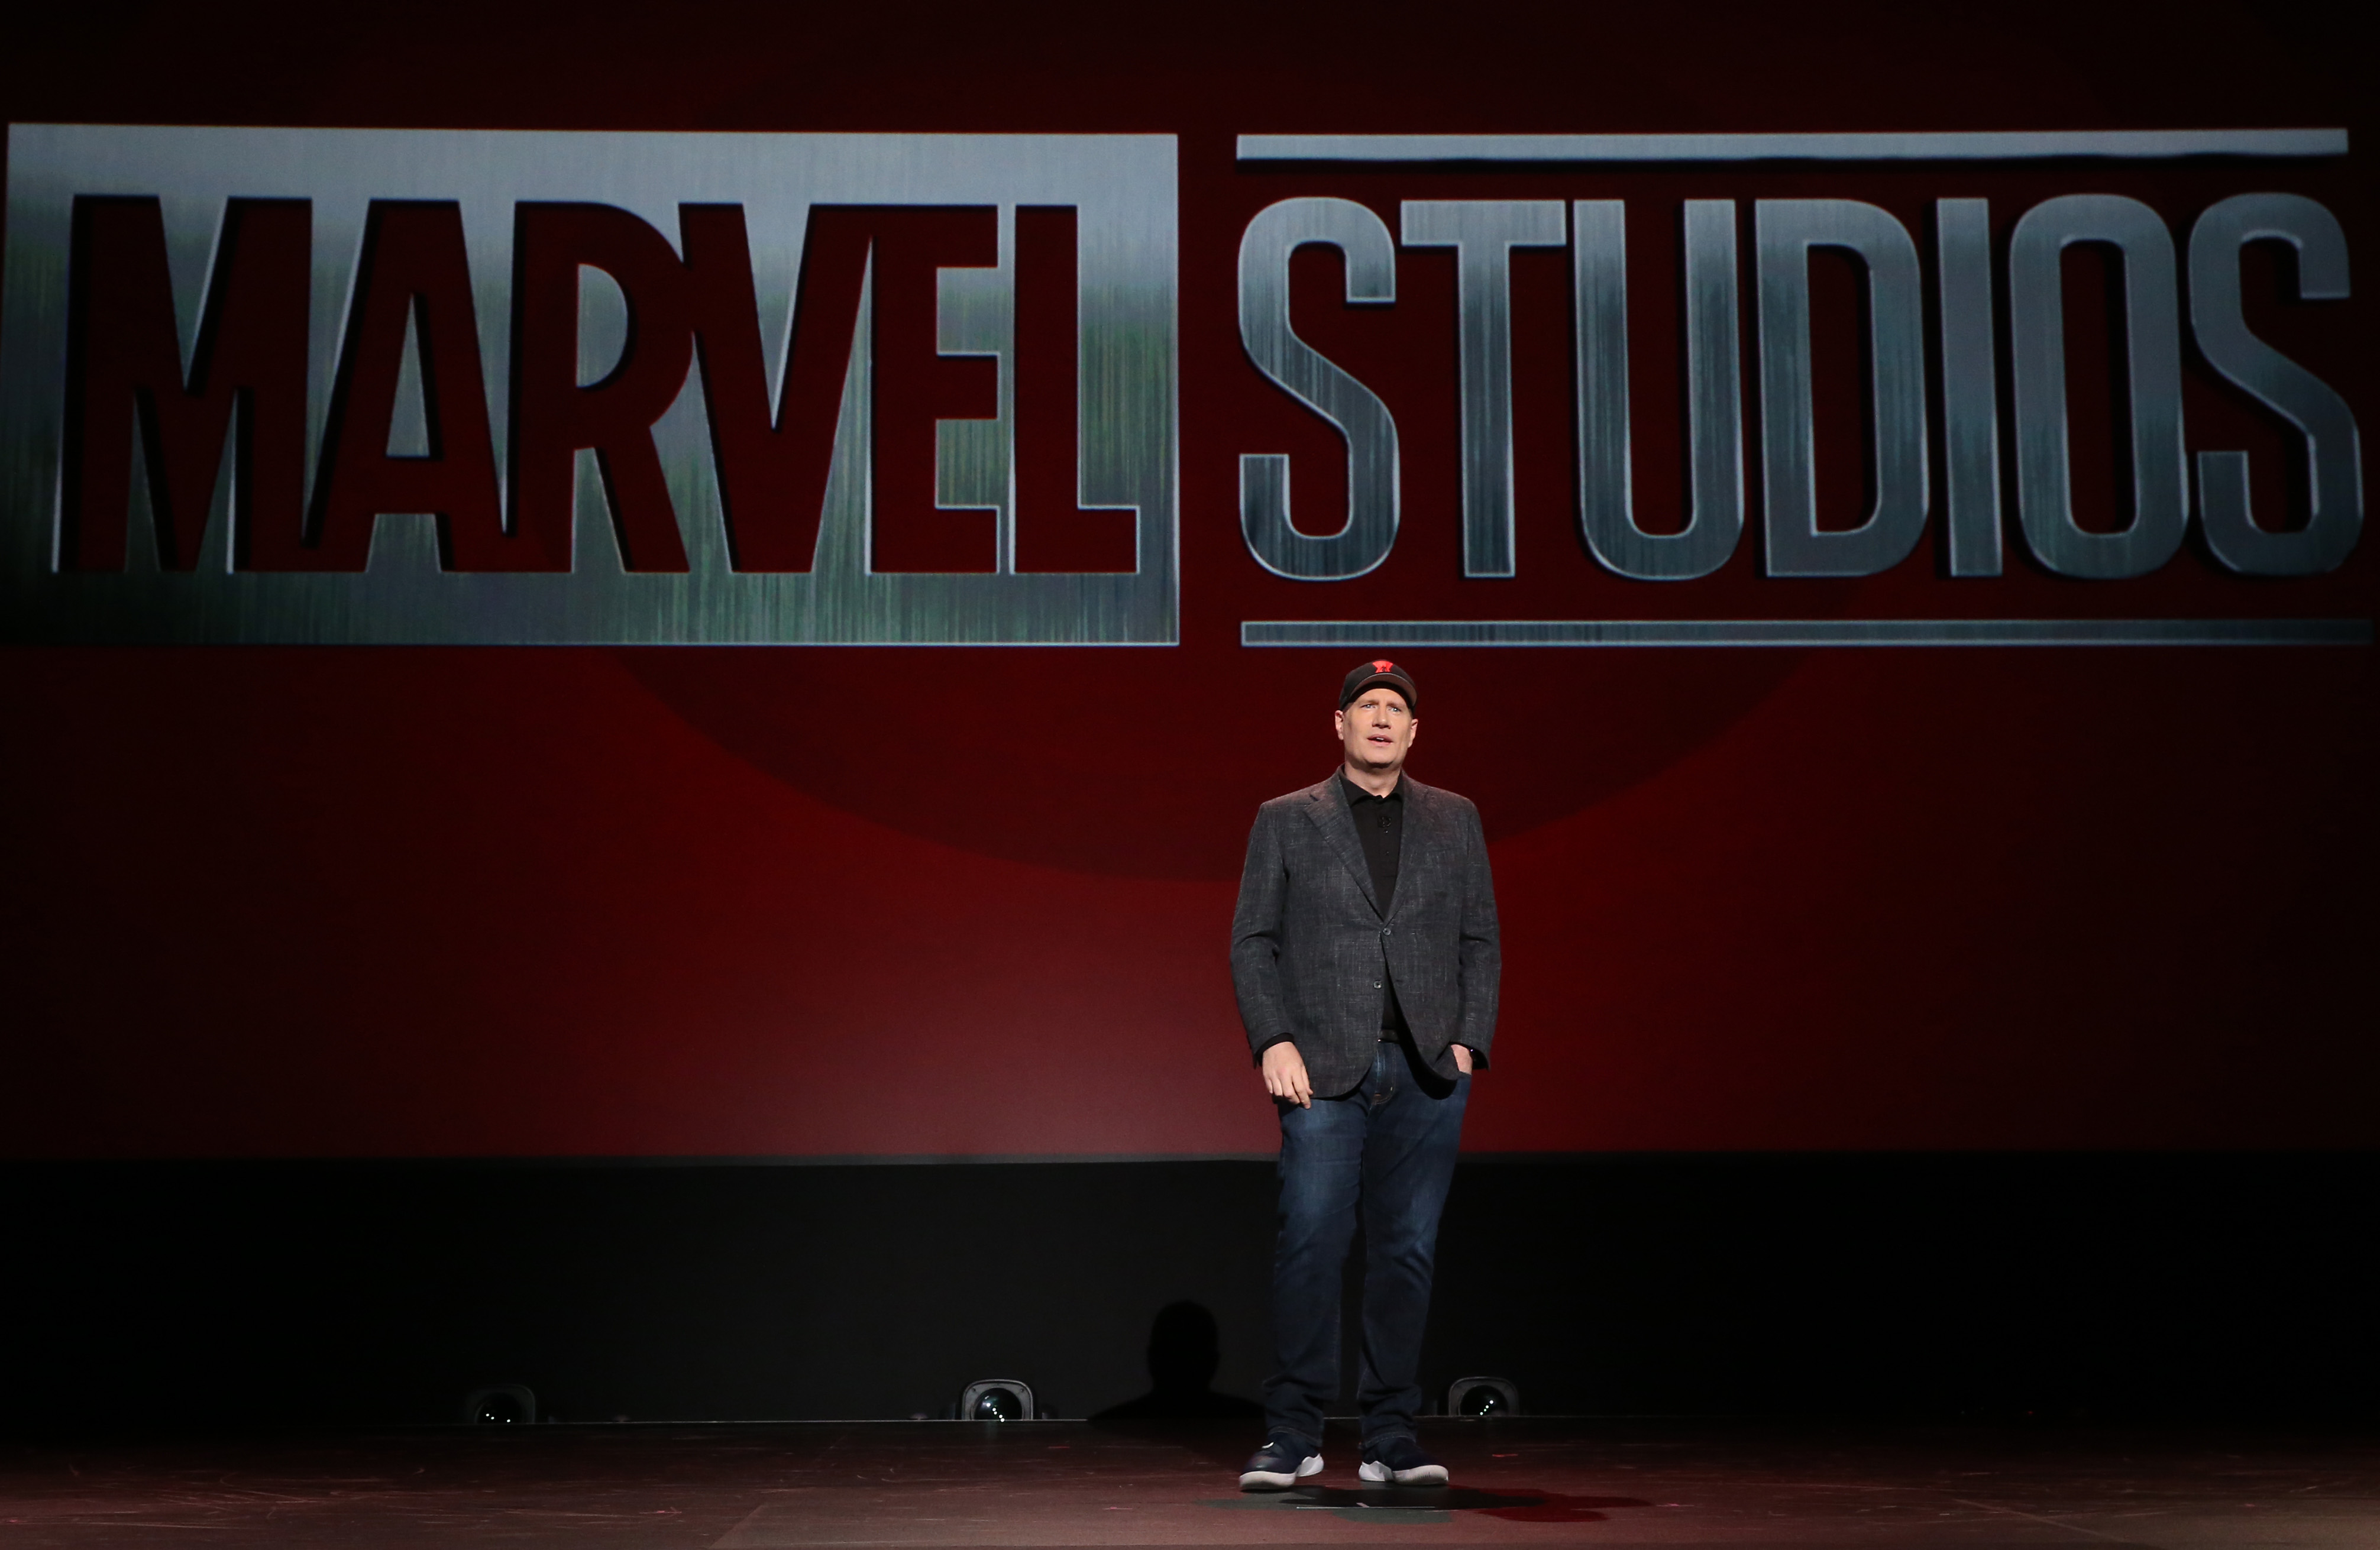 Marvel Studios president Kevin Feige stands in front of a screen that reads 'Marvel Studios.' He wears a gray suit over a black shirt and jeans, and a black baseball cap. Disney recently announced the delay of many MCU Phase 4 films.